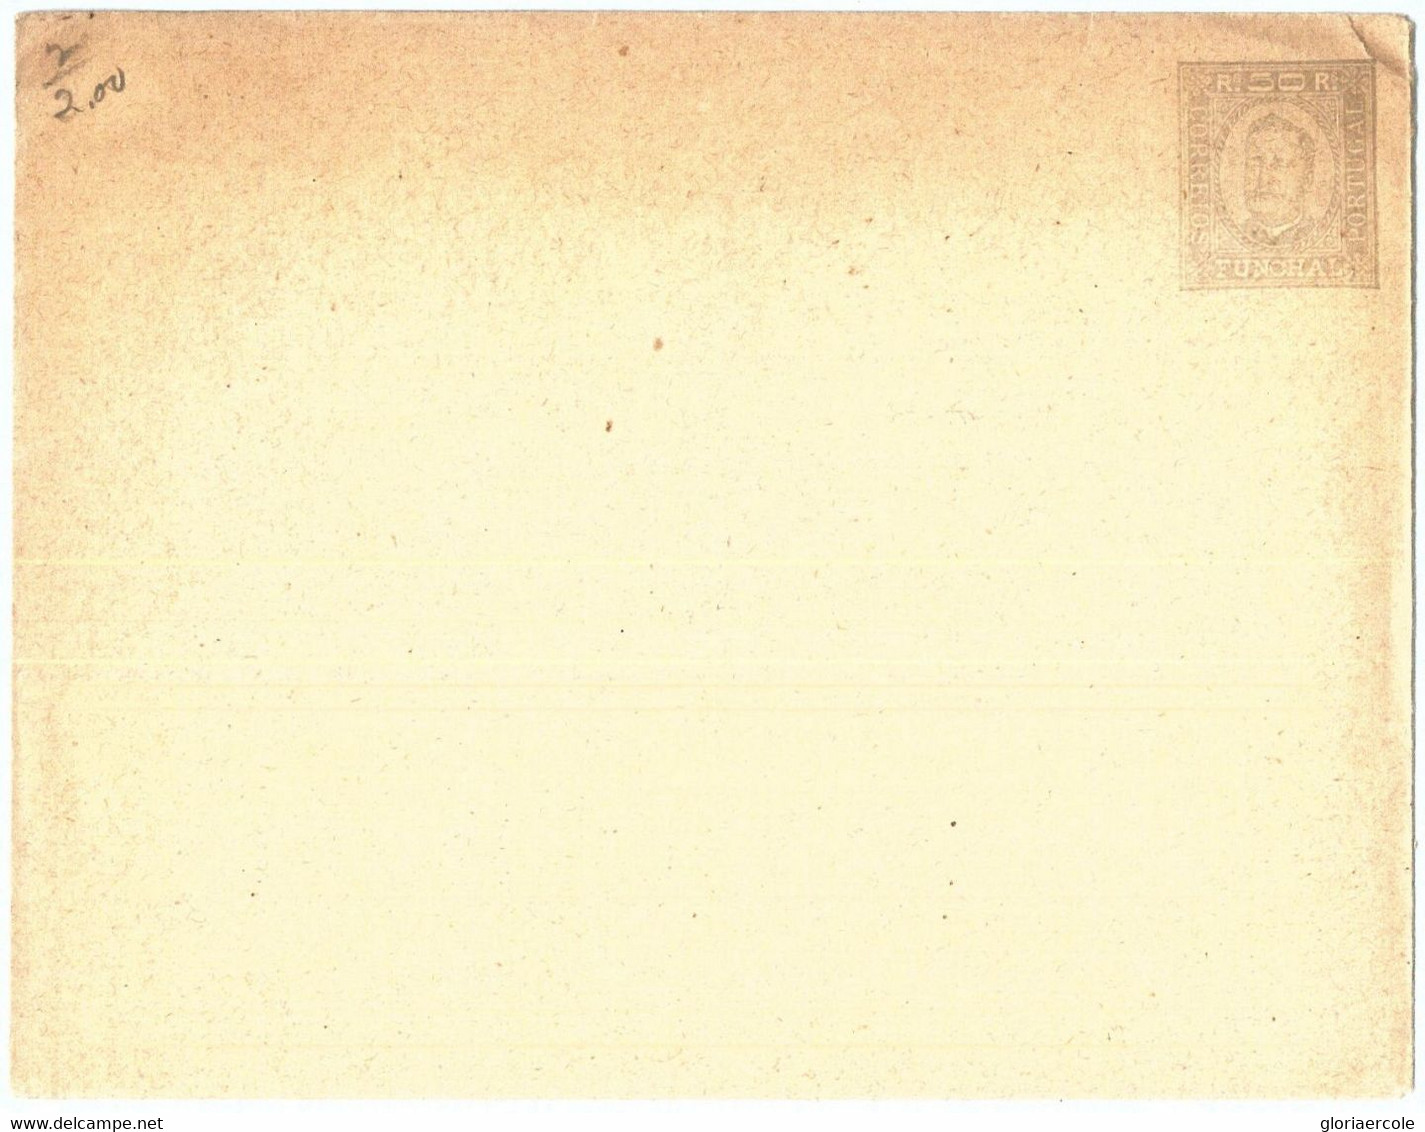 72500 - FUNCHAL -   POSTAL STATIONERY  COVER - Higgings & Gage  # 2 - Funchal